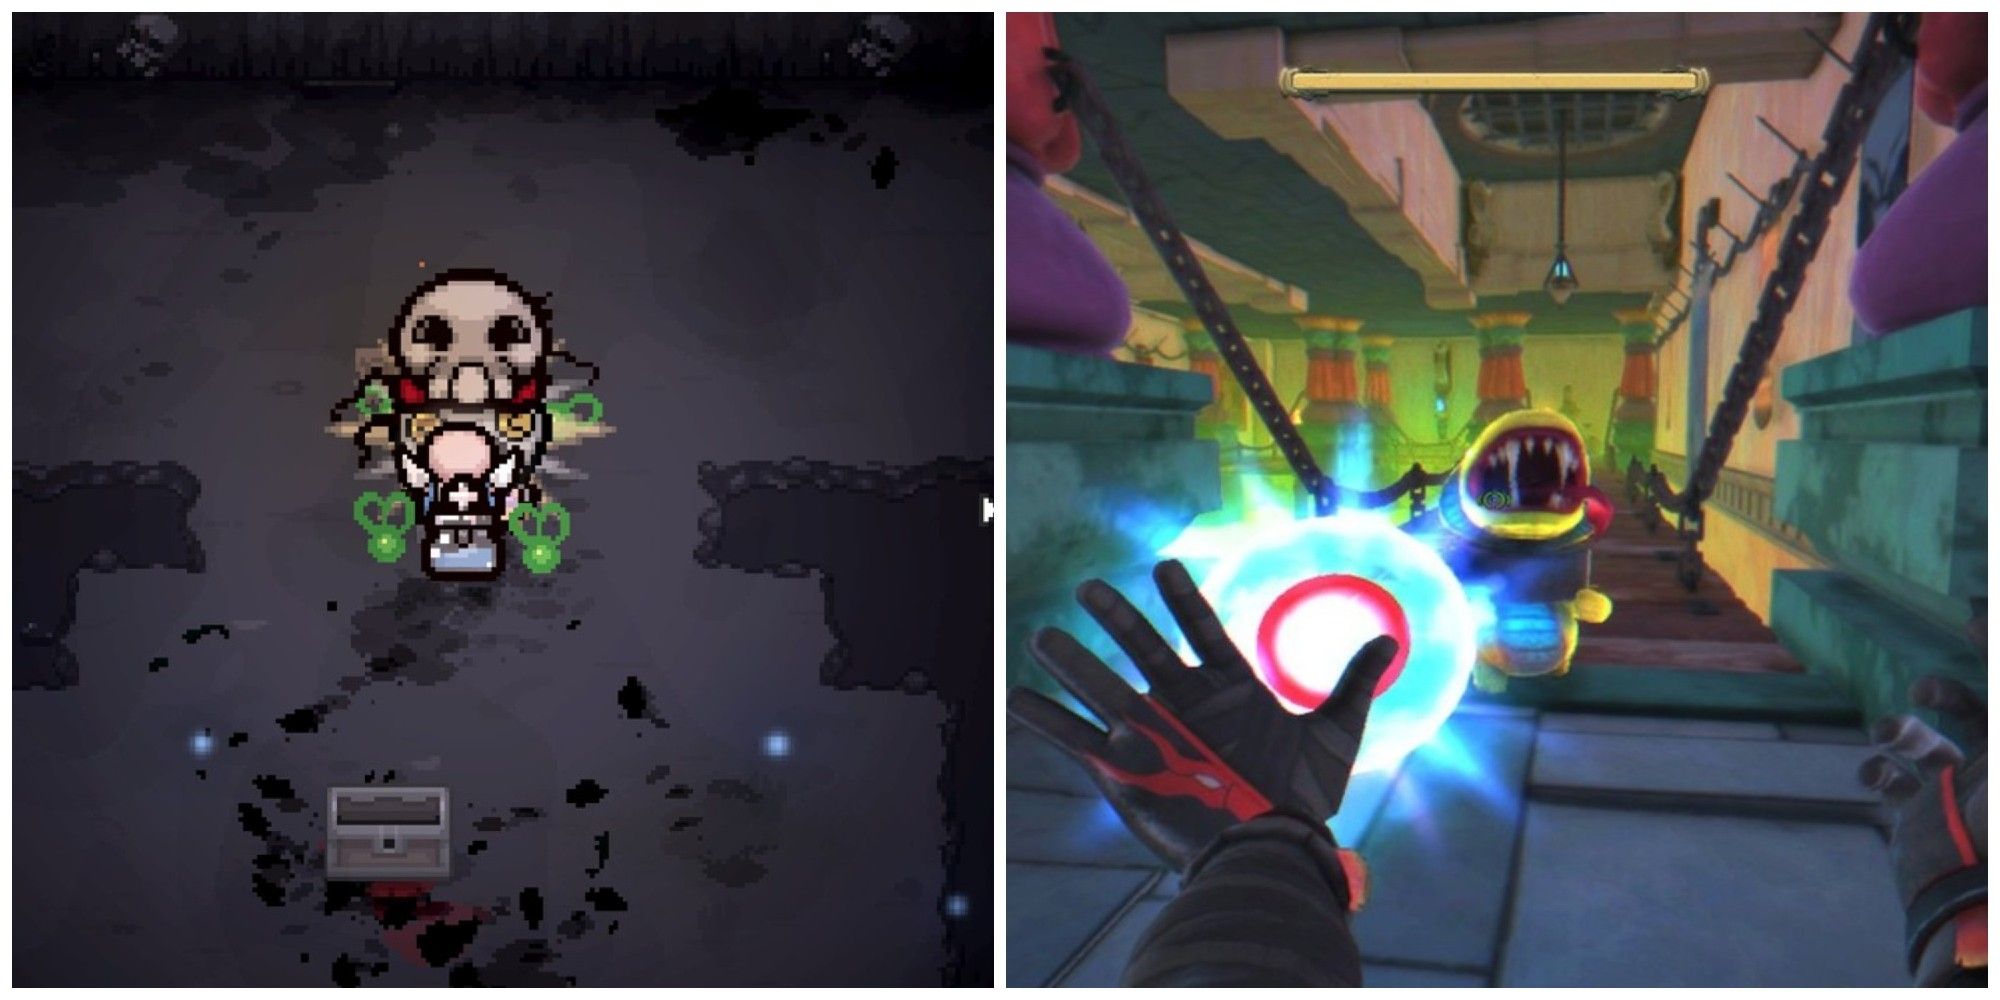 split image of Binding of Isaac grave and Immortal Redneck shooting orb